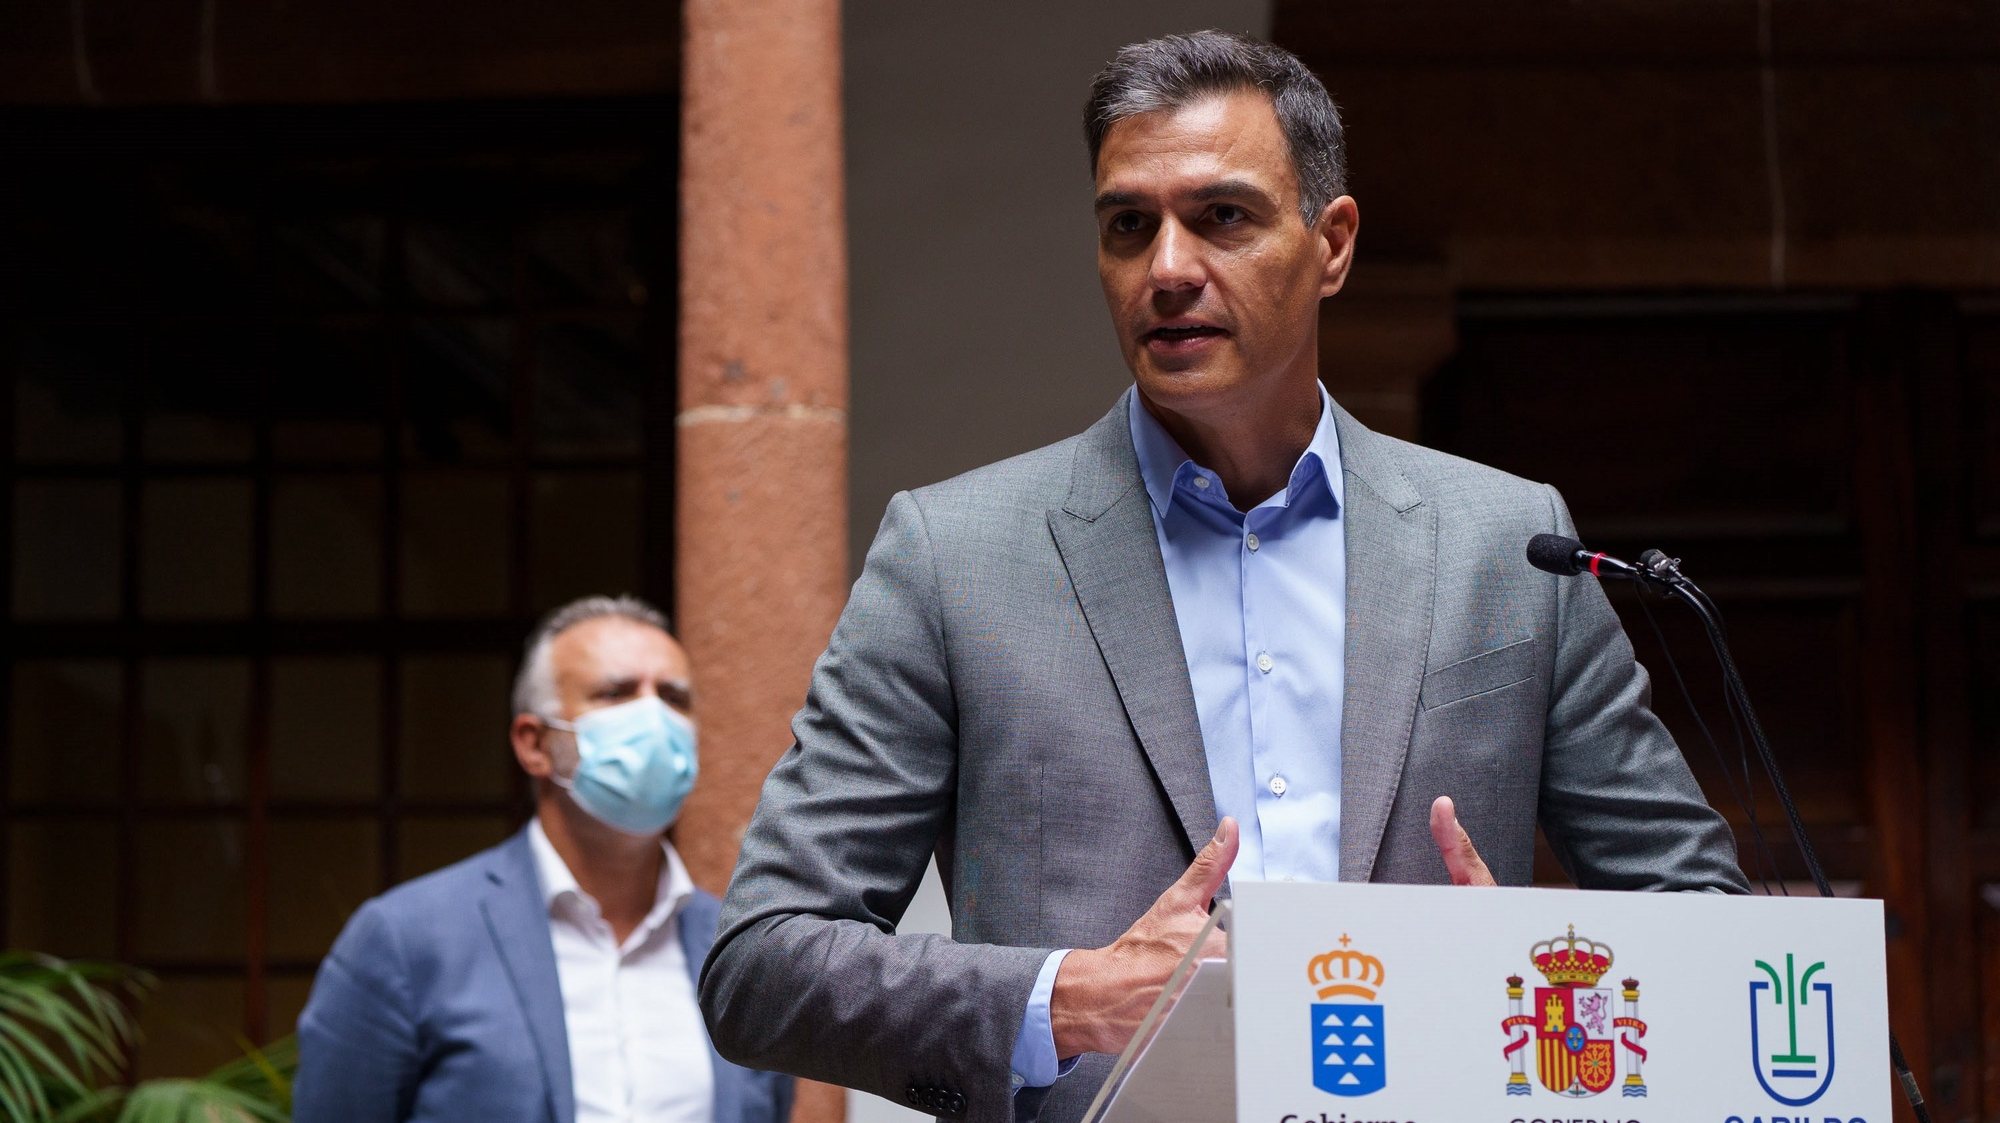 epa09485385 Spanish Prime minister Pedro Sanchez (R) and Canary Islands regional president Angel Victor Torres (L) during the press conference after their work meeting held at Santa Cruz de La Palma, Canary Islands, Spain on 24 September 2021 to evaluate the damages caused by the Cumbre Vieja volcano. The volcano began to erupt in Rajada Mountain in the municipality of El Paso on 19 September. The area had registered hundreds of small earthquakes along the week as magma pressed the subsoil on its way out, urging the regional authorities to evacuate locals before the eruption took place.  EPA/Ramon de la Rocha